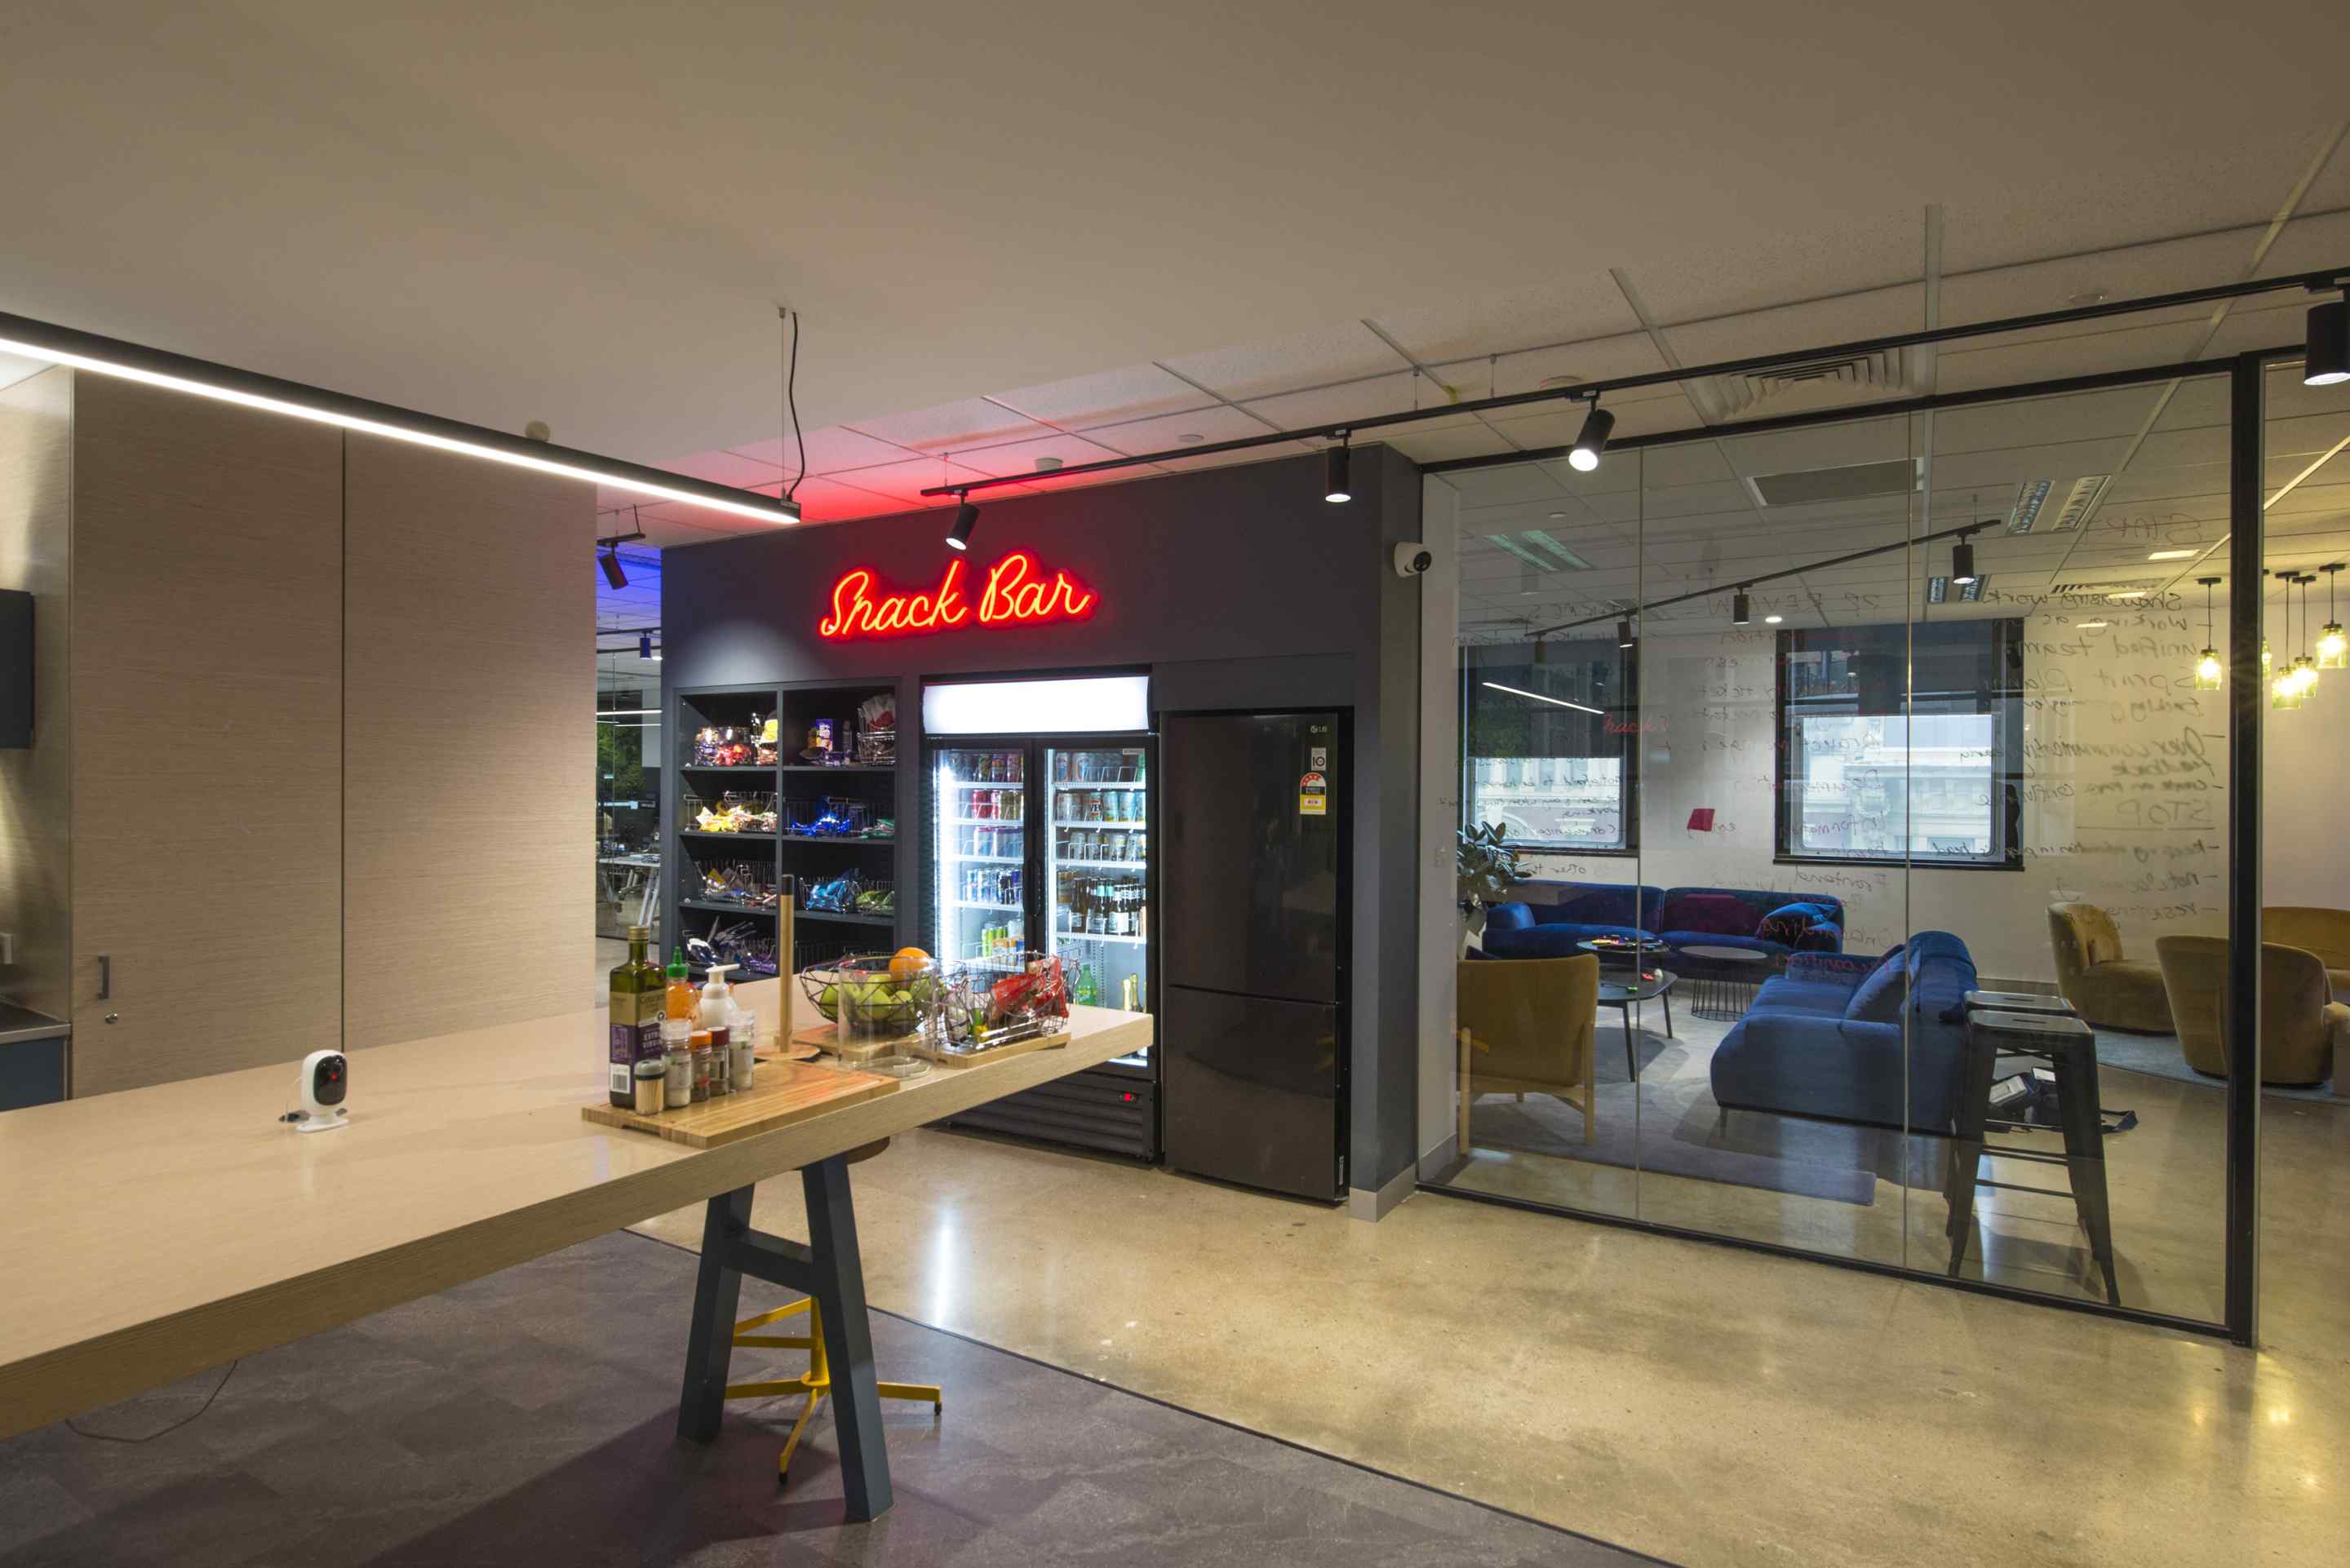 cafe style drinks fridge and open pantry with neon snack bar sign, long wooden kitchen bench, glass partitions with staff lounge in background with velvet chairs in blue and fawn colours